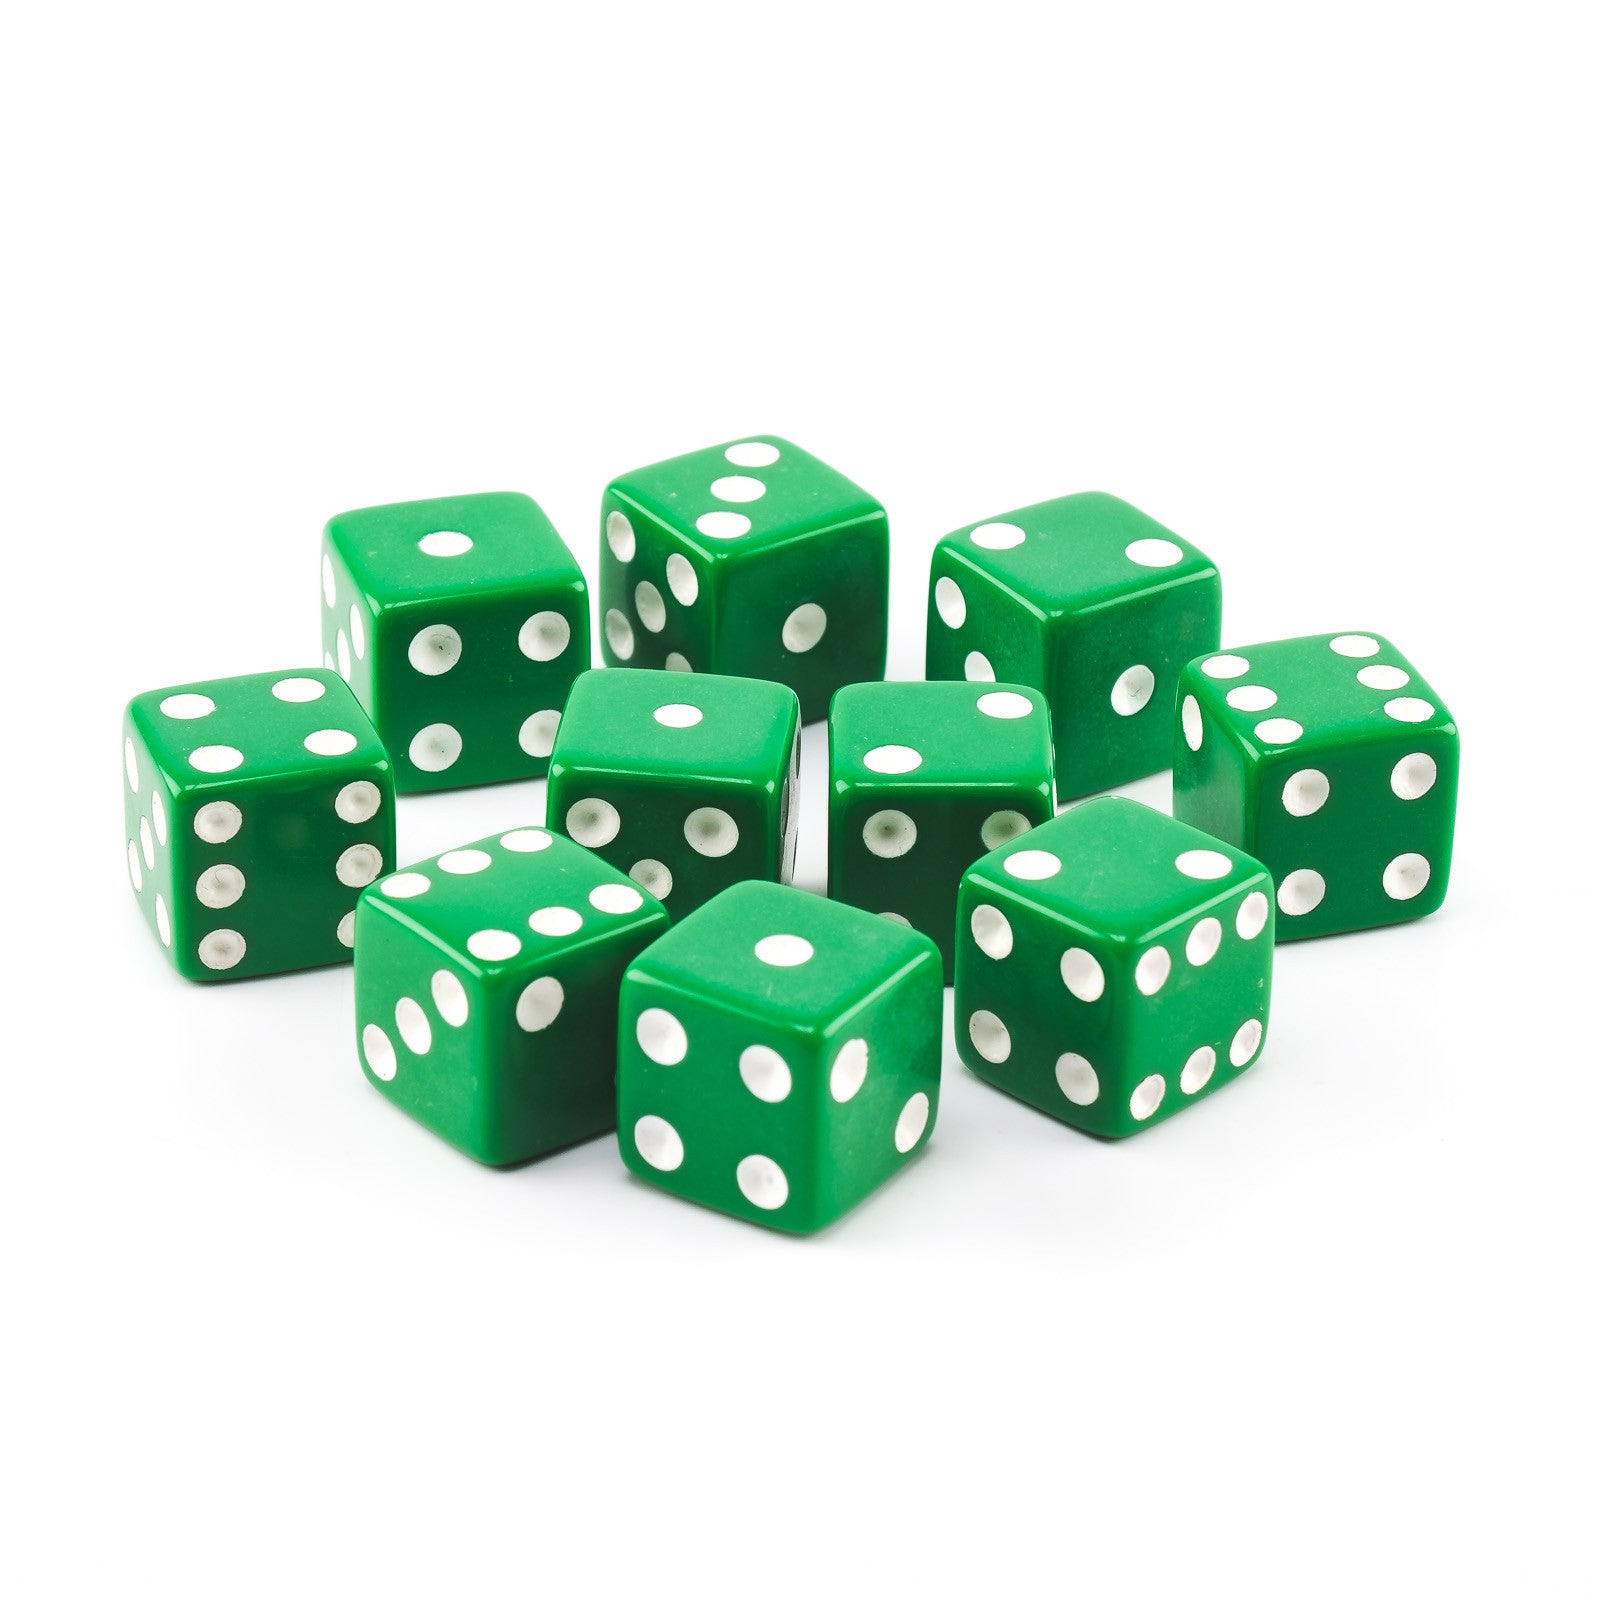 Economy Dice 5/8 inch (16mm) - 10 Pack